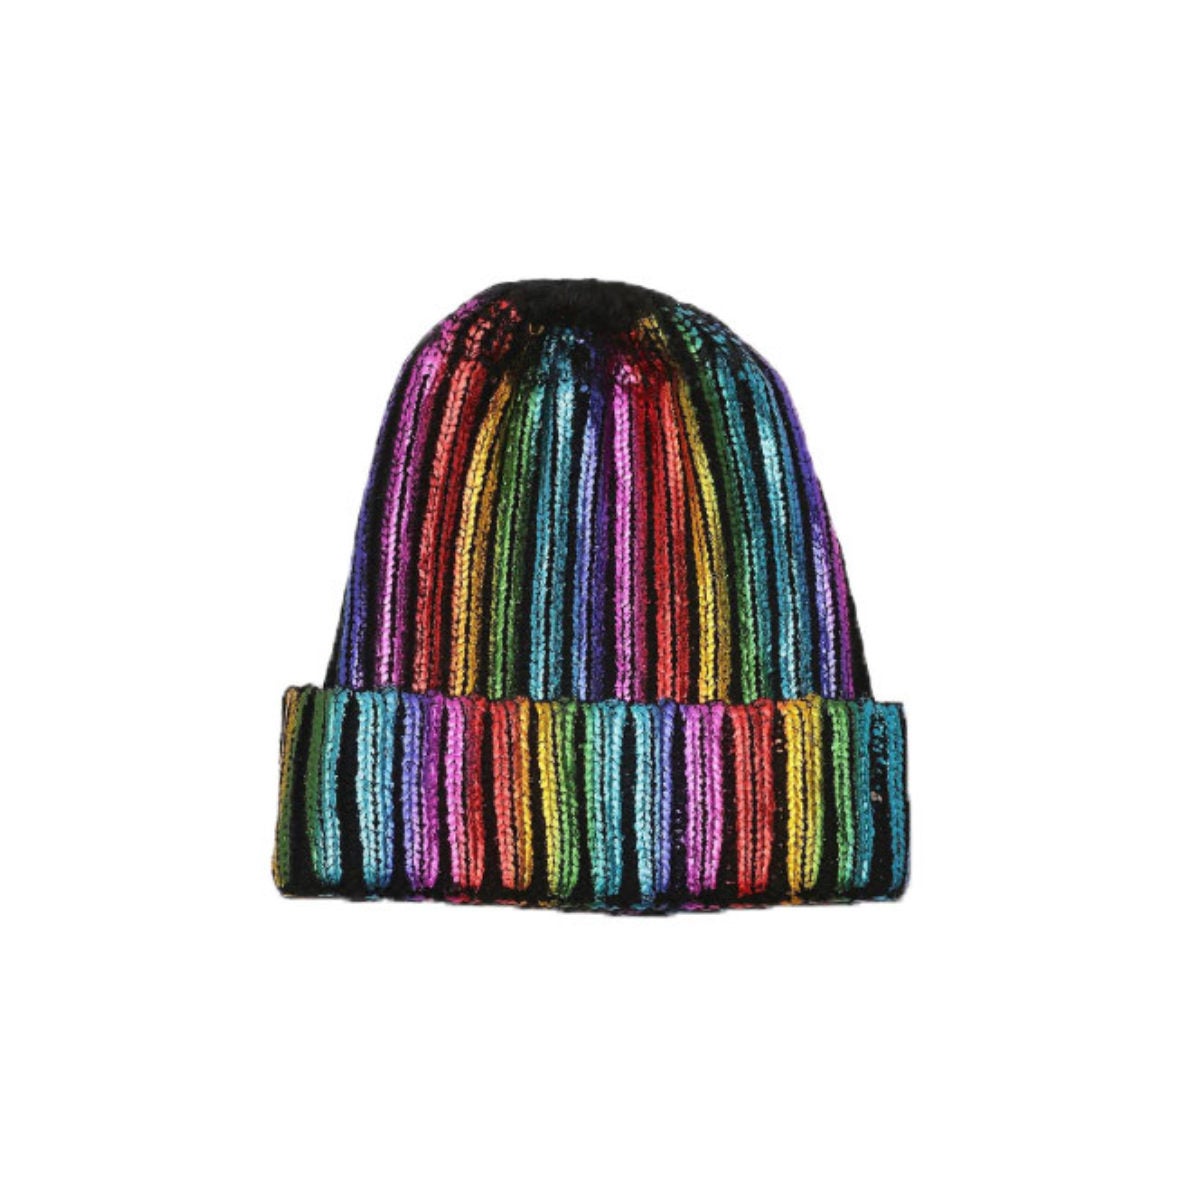 Shop 10 Beanies That Are Cute Enough To Wear All Day - Essence